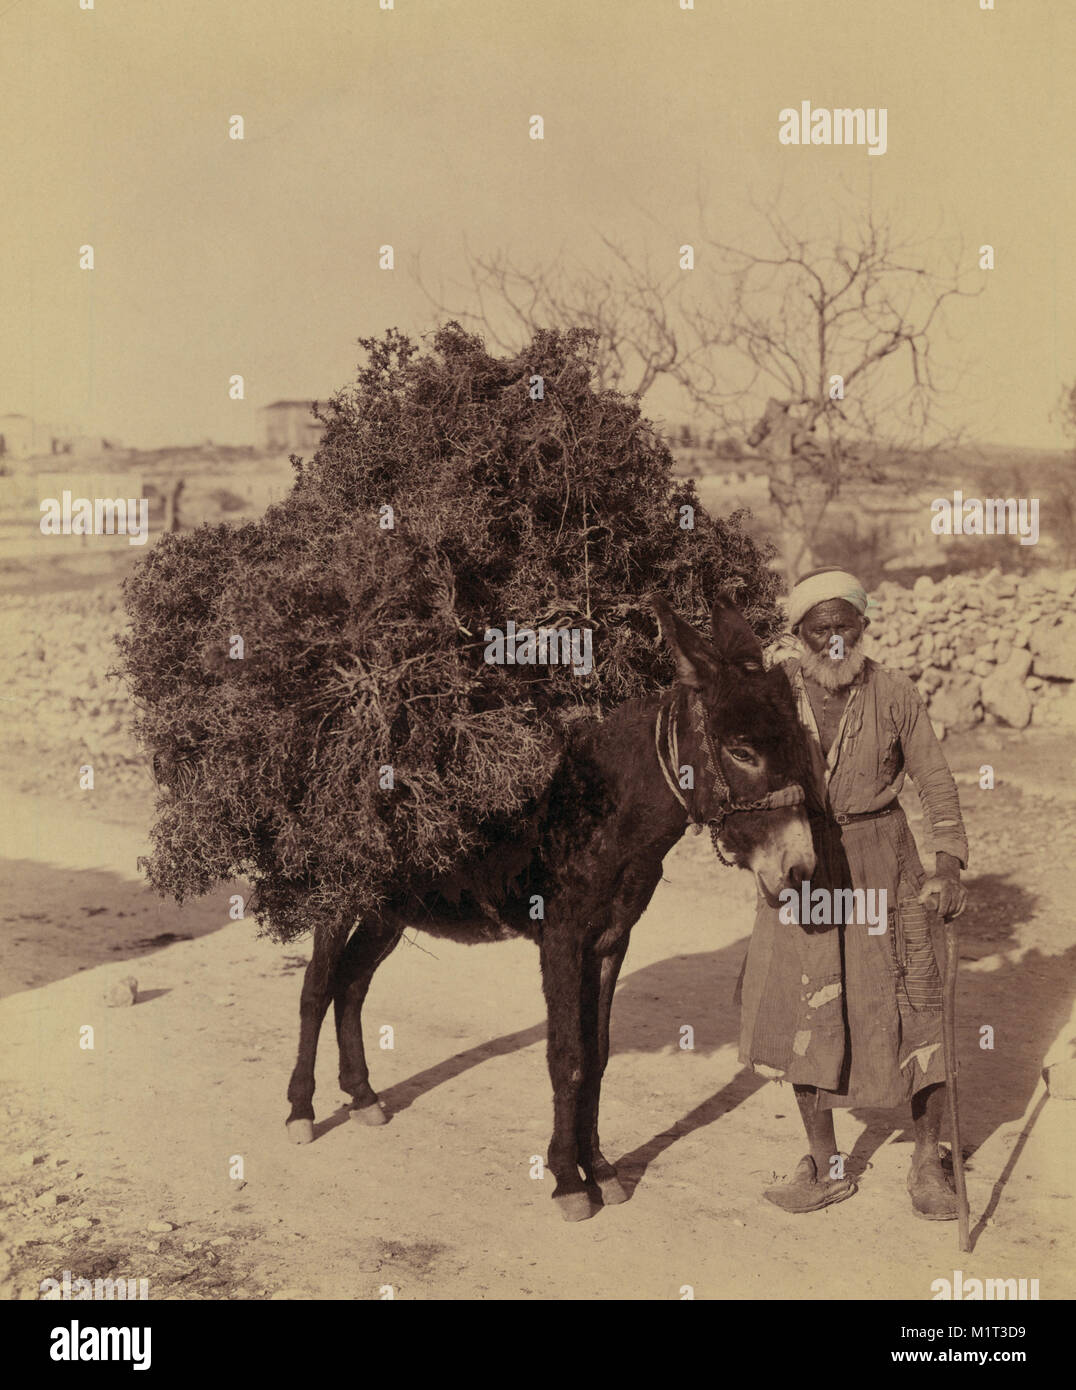 Arab Man with Donkey Carrying Load of Roots and Twigs, Palestine, American Colony Photo Department, early 1900's Stock Photo